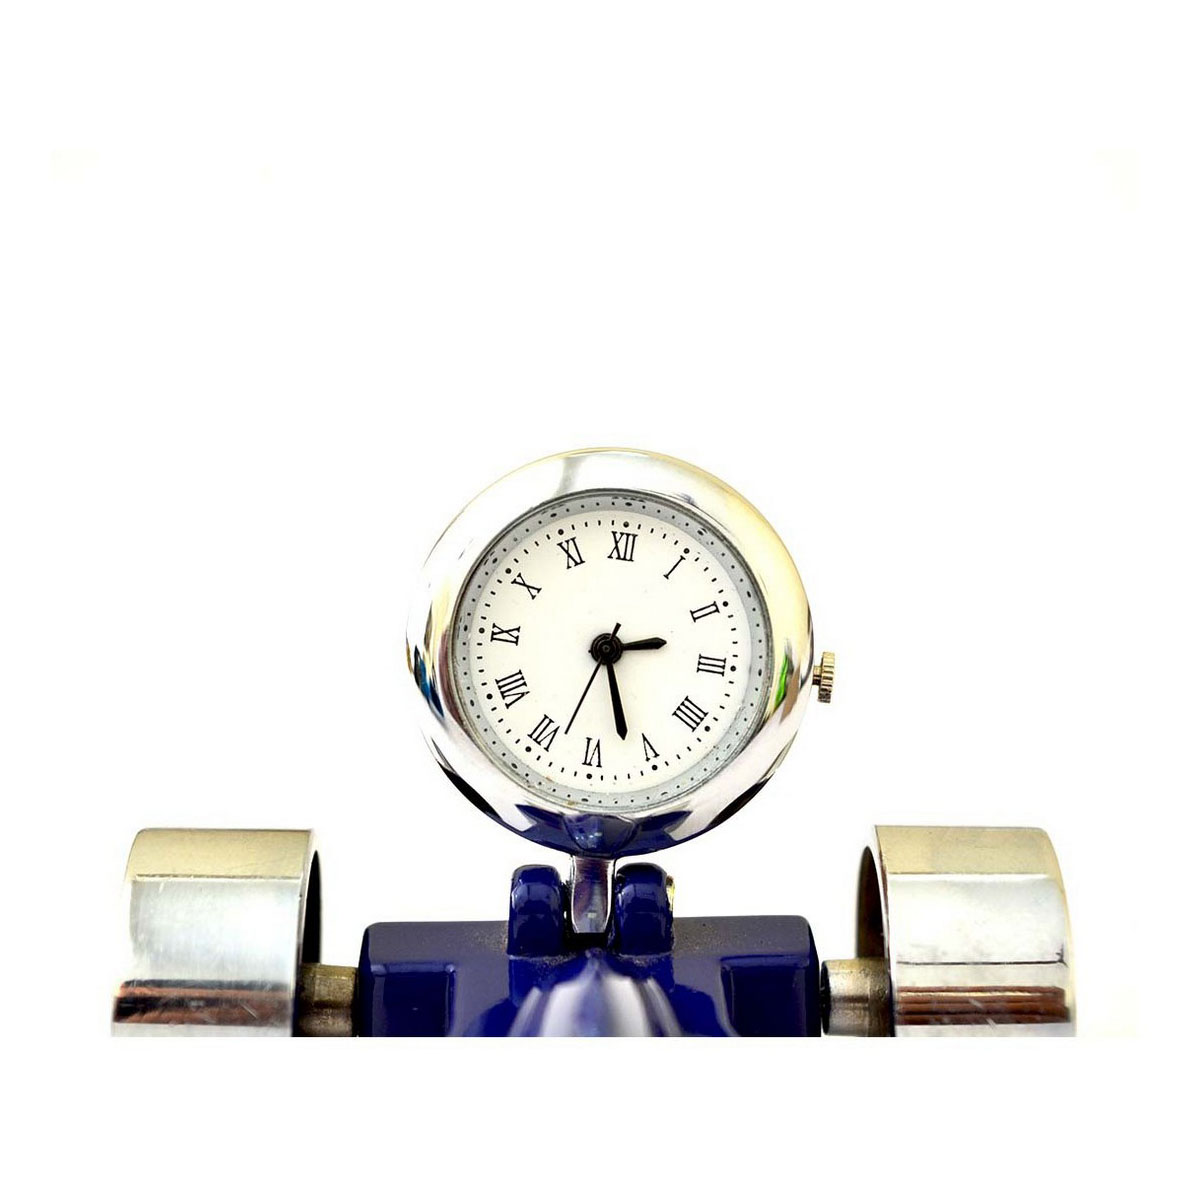 Race Car Paper Weight with Clock - Blue